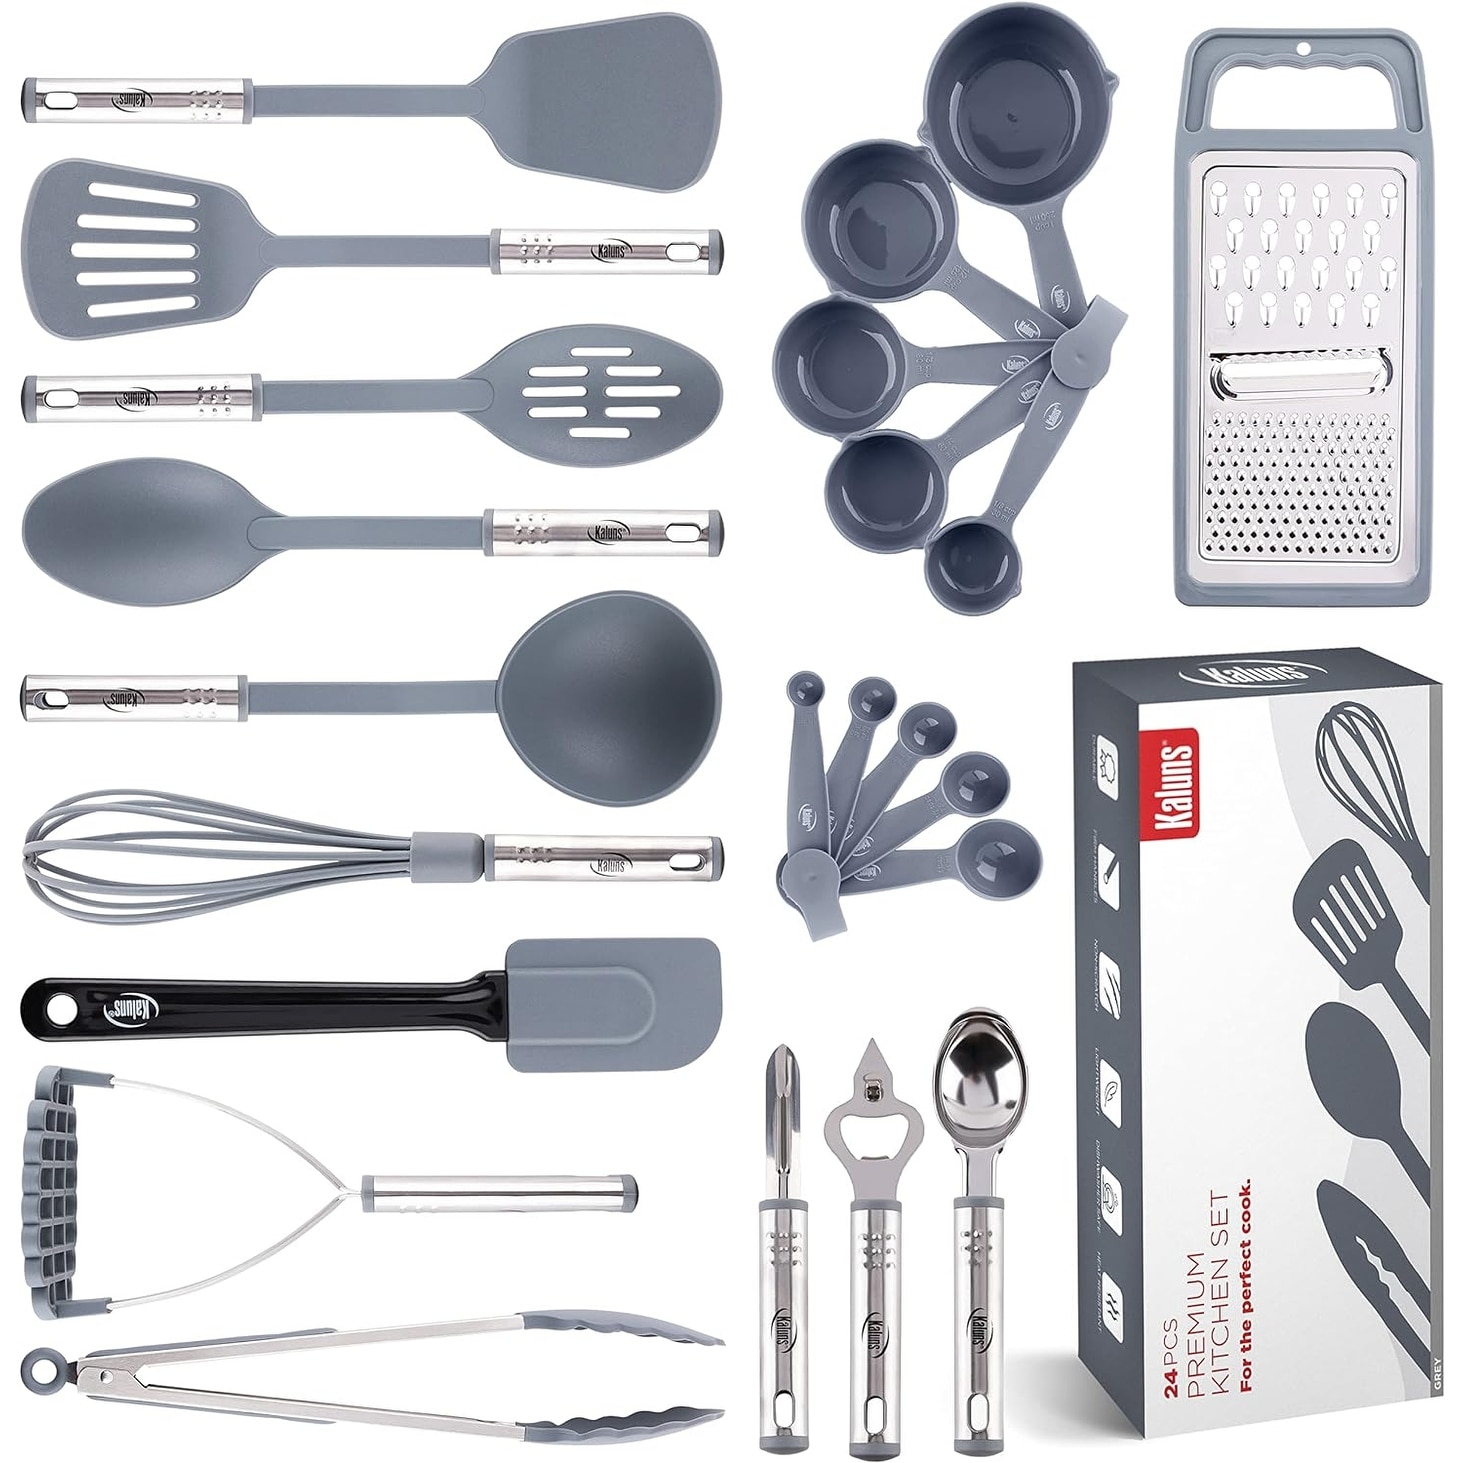 https://ak1.ostkcdn.com/images/products/is/images/direct/fe4774afd6d552e282d712d23a3ce77334a0ee7b/Kitchen-Utensil-Set%2C-24-Nylon-and-Stainless-Steel-Cooking-Utensils.jpg